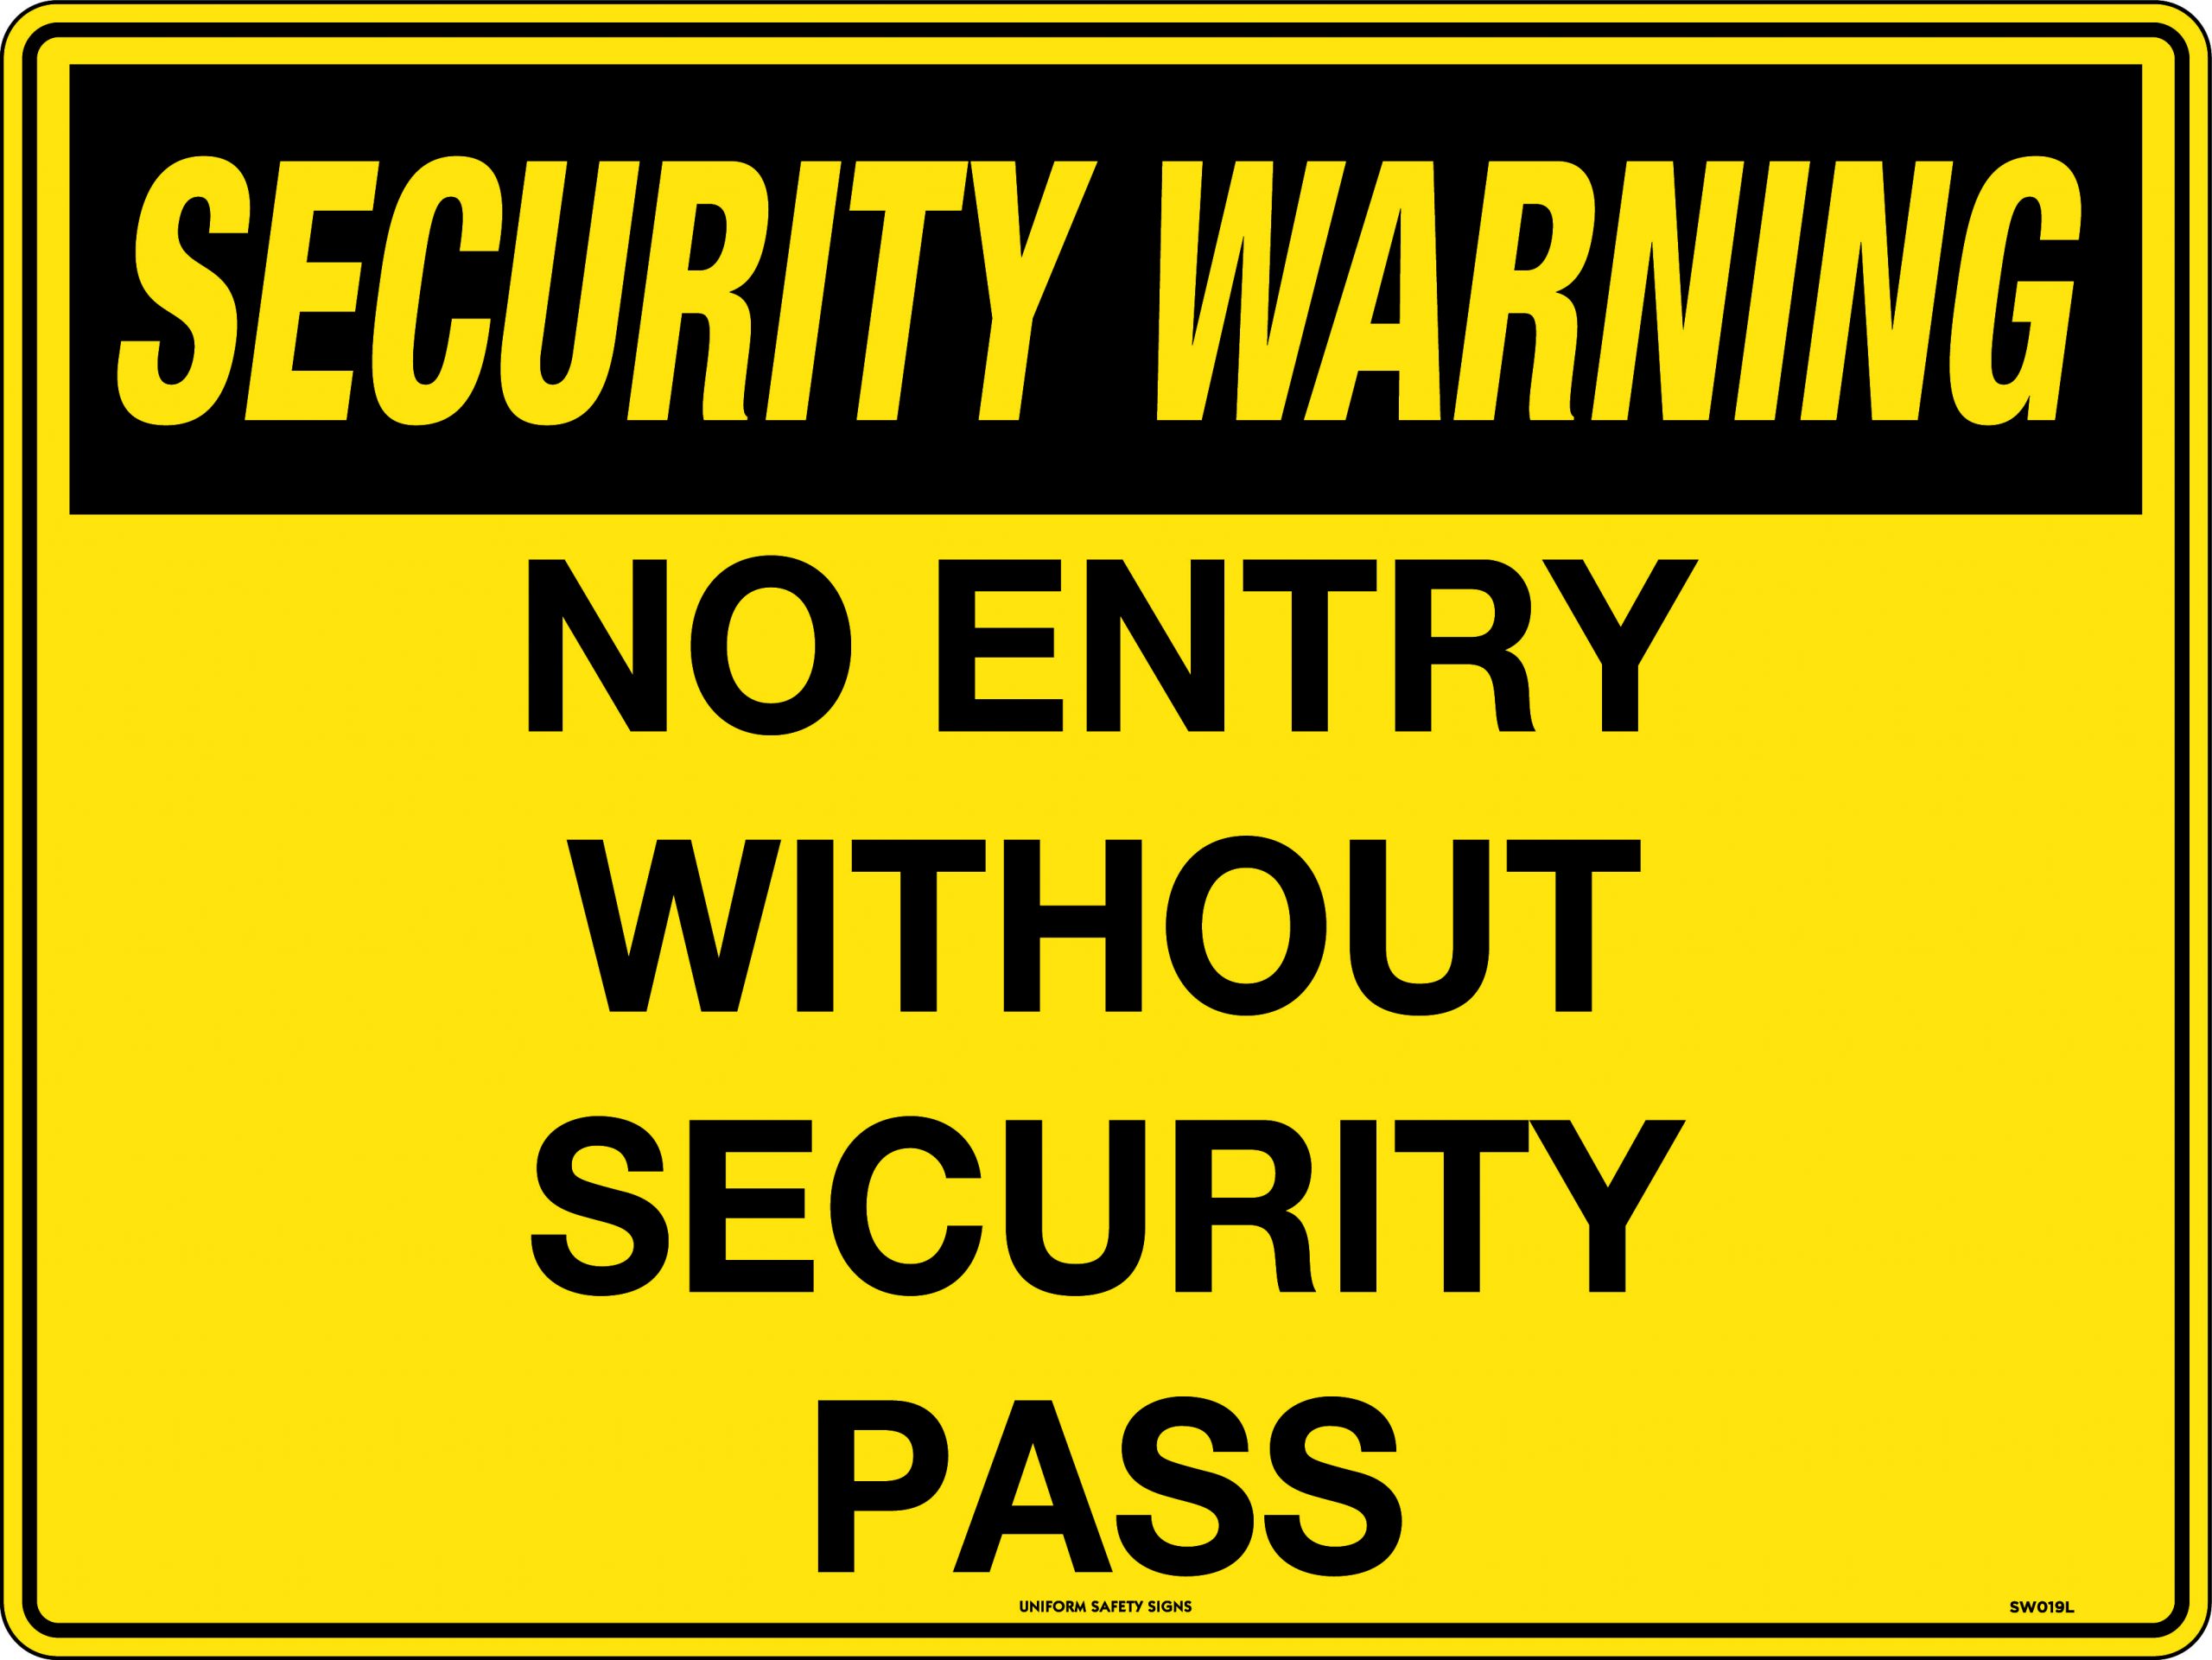 UNIFORM SAFETY 450X300MM METAL SEC WARNING NO ENTRY WITHOUT SEC PASS